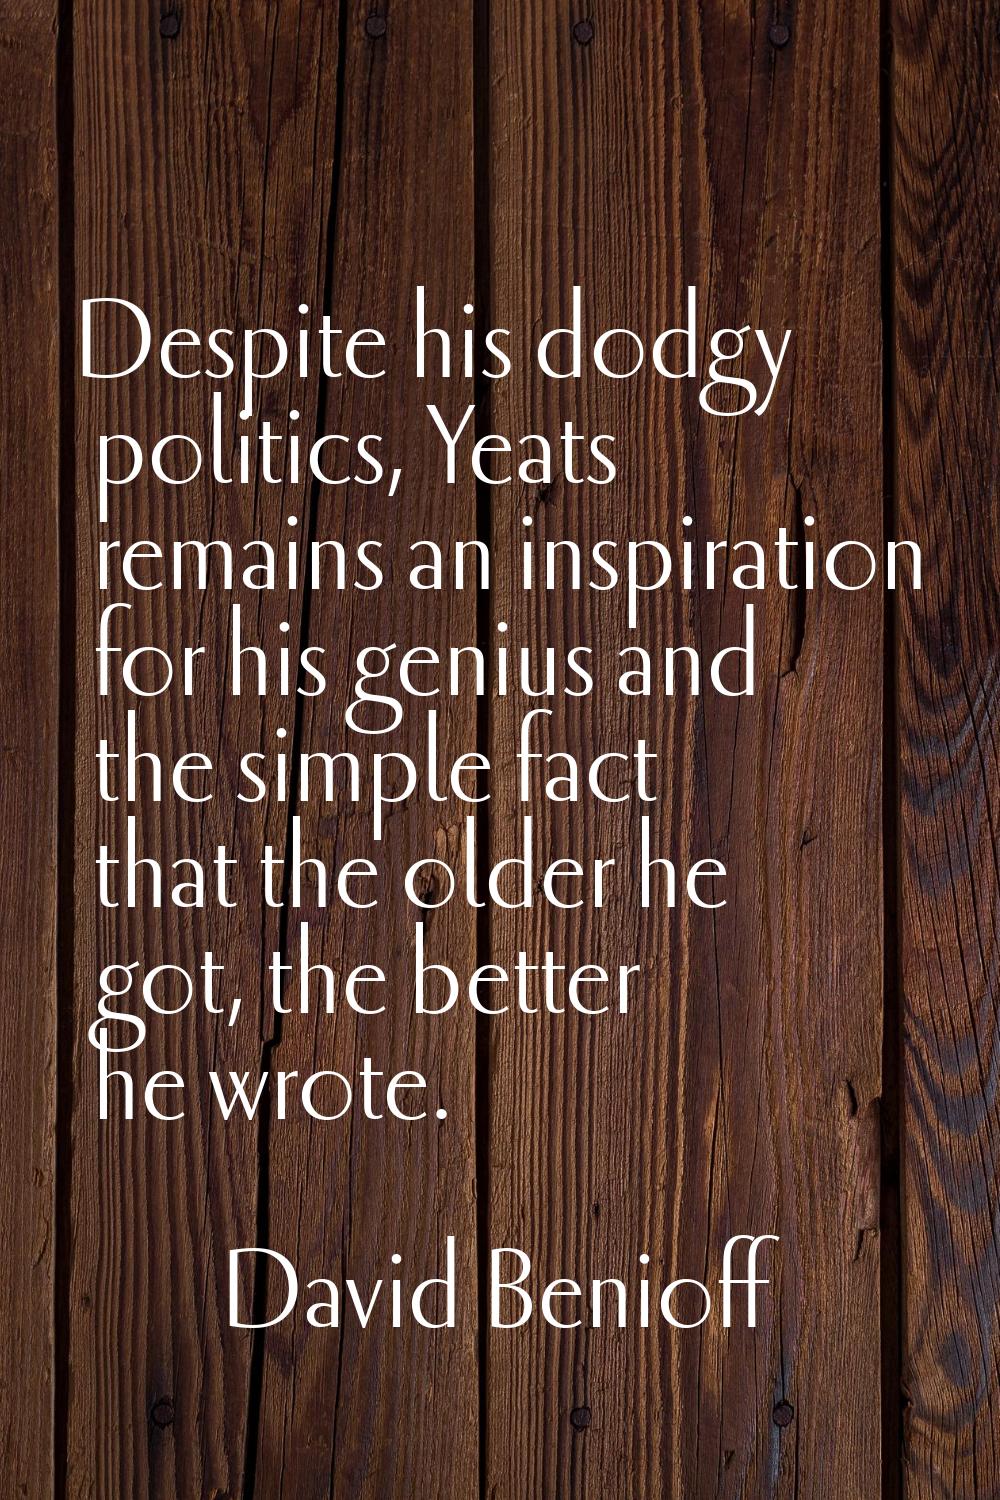 Despite his dodgy politics, Yeats remains an inspiration for his genius and the simple fact that th